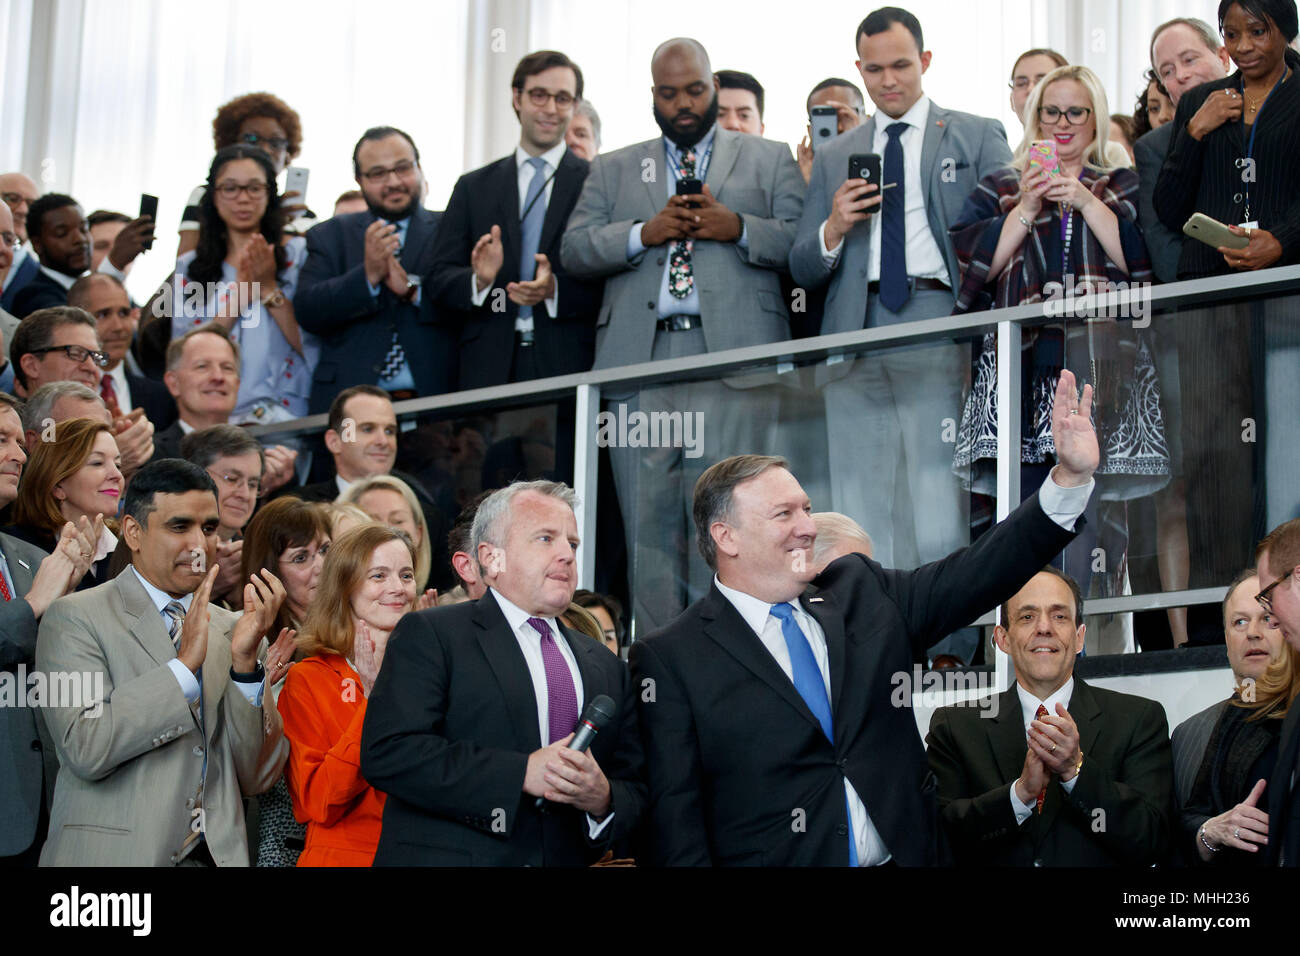 (180501) -- WASHINGTON, May 1, 2018 (Xinhua) -- U.S. Secretary of State Mike Pompeo waves to State Department employees at the Department of State in Washington D.C., the United States, on May 1, 2018. (Xinhua/Ting Shen) Stock Photo